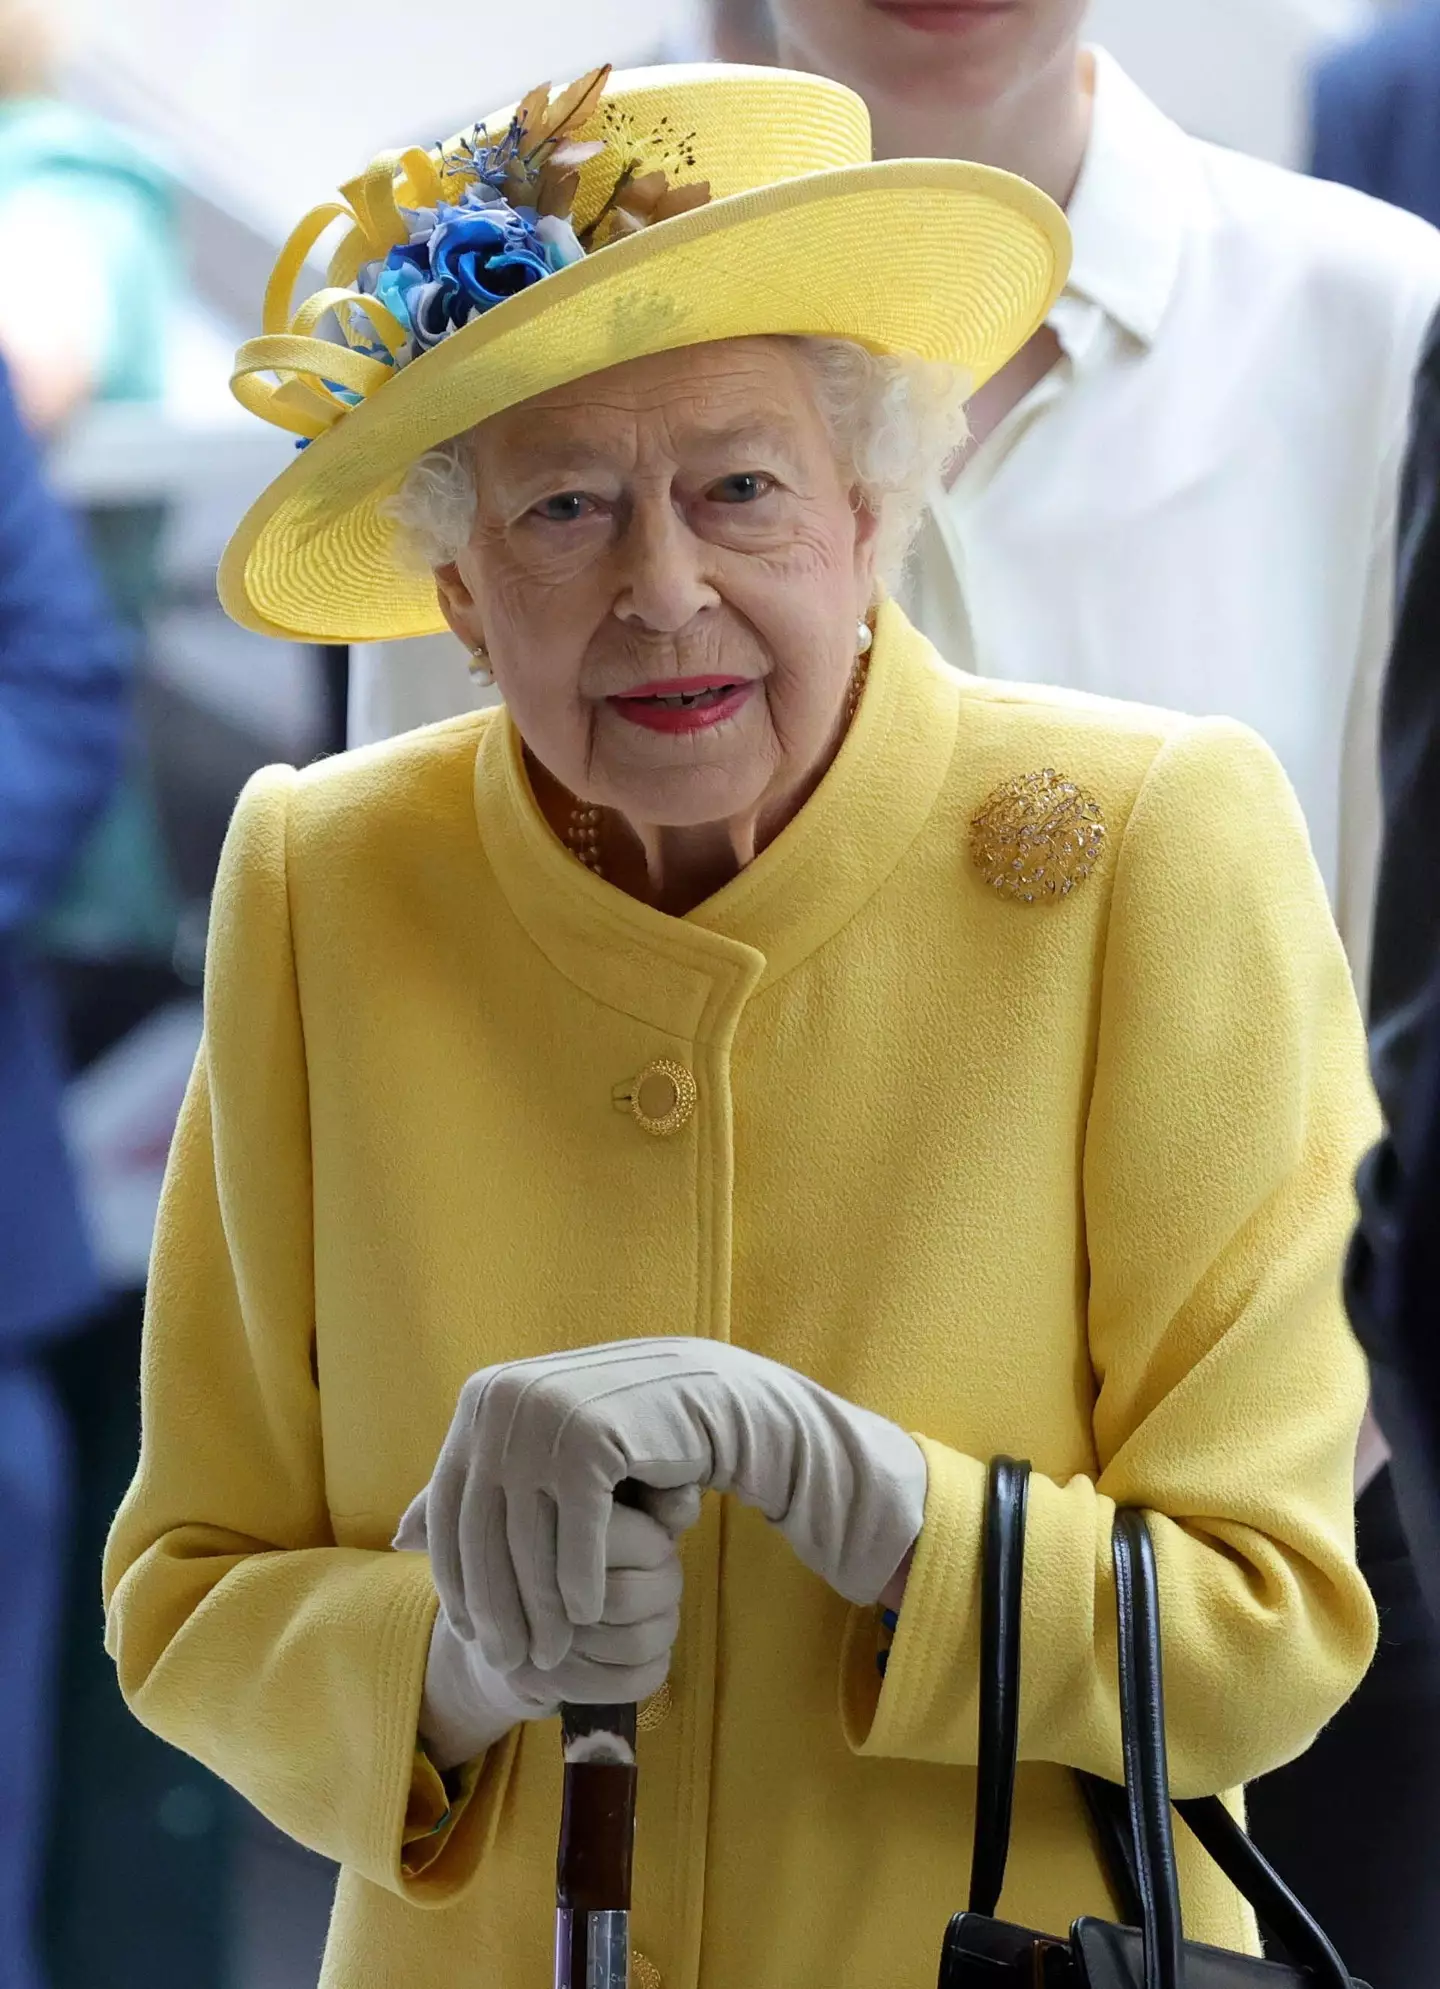 The Queen died at her home in Balmoral, Scotland on 8 September.